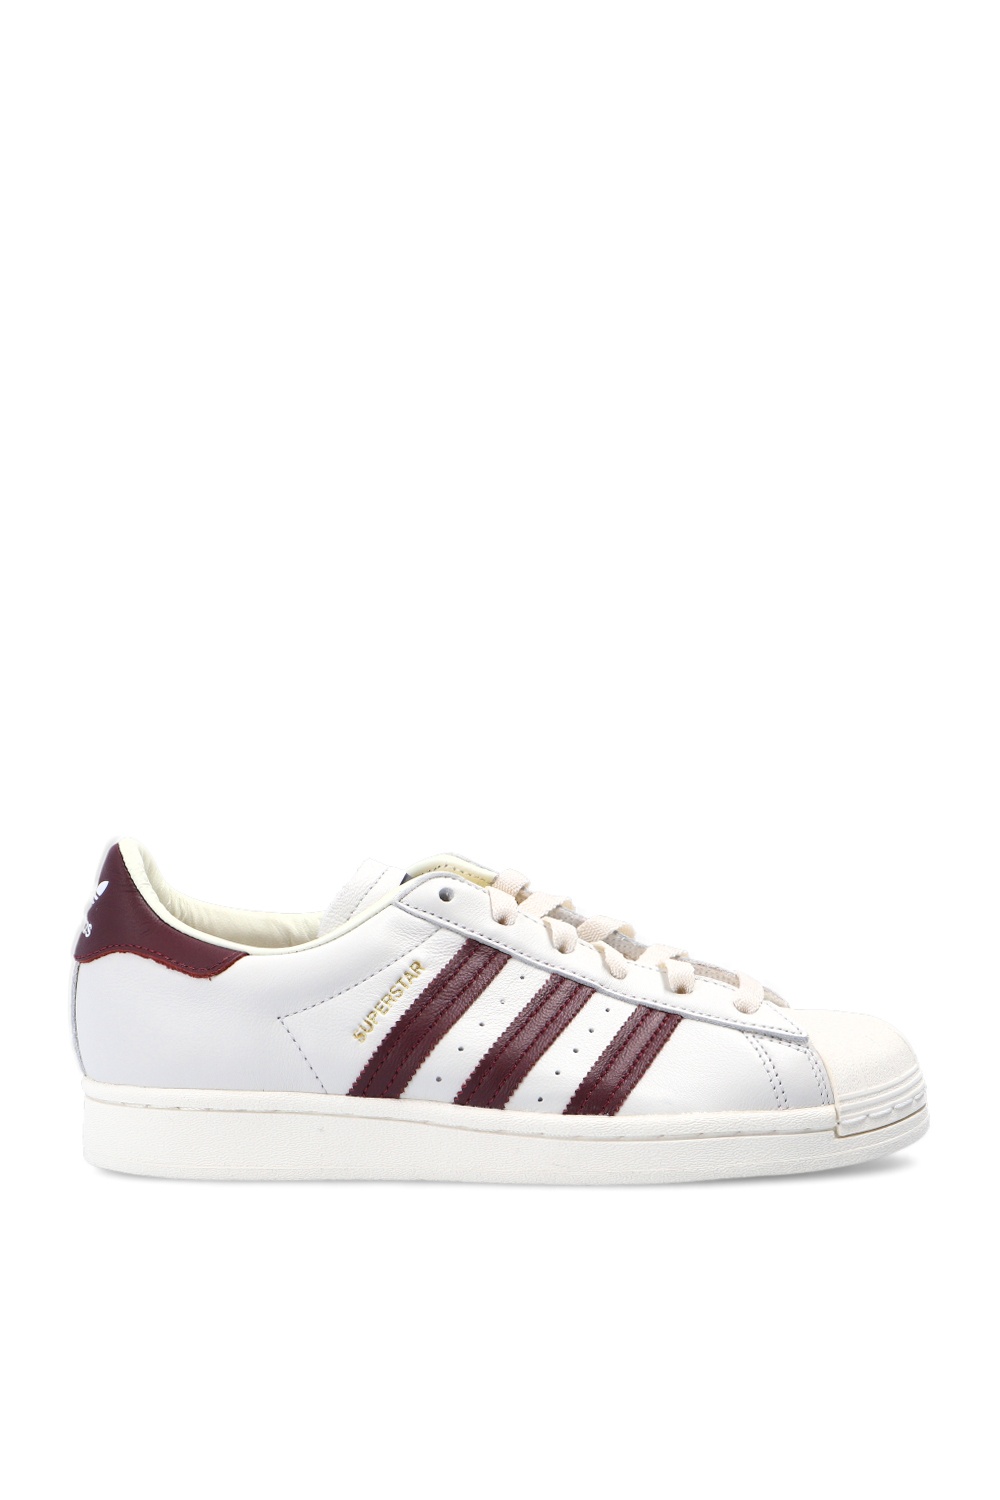 adidas runners milano eventi shoes outlet list - Ietp US - 'Superstar'  sneakers ADIDAS Originals